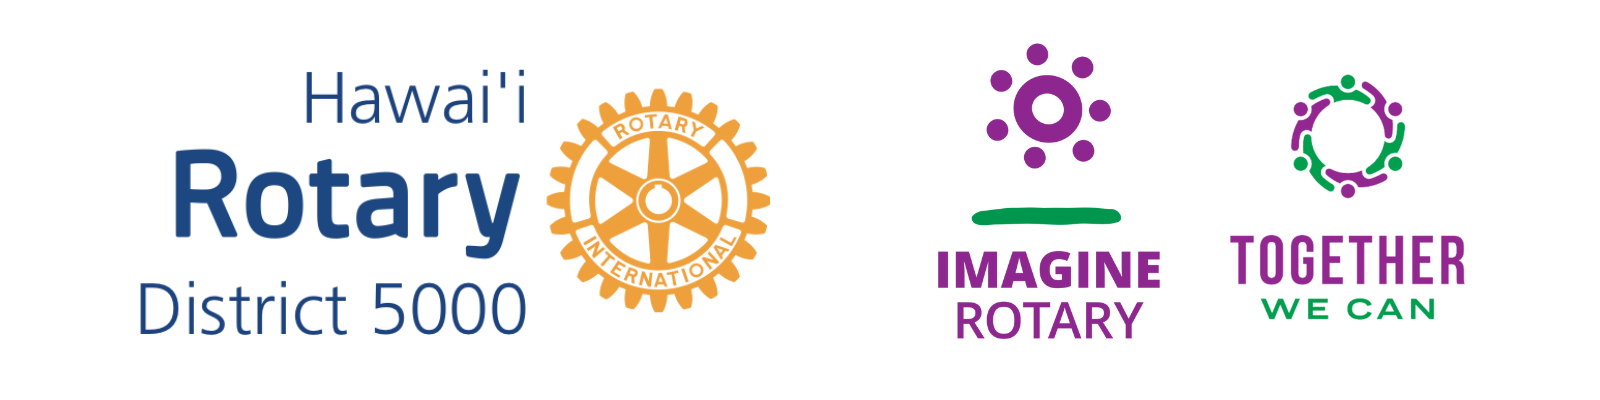 Hawai'i Rotary District 5000 | Imagine Rotary | Together, We Can!